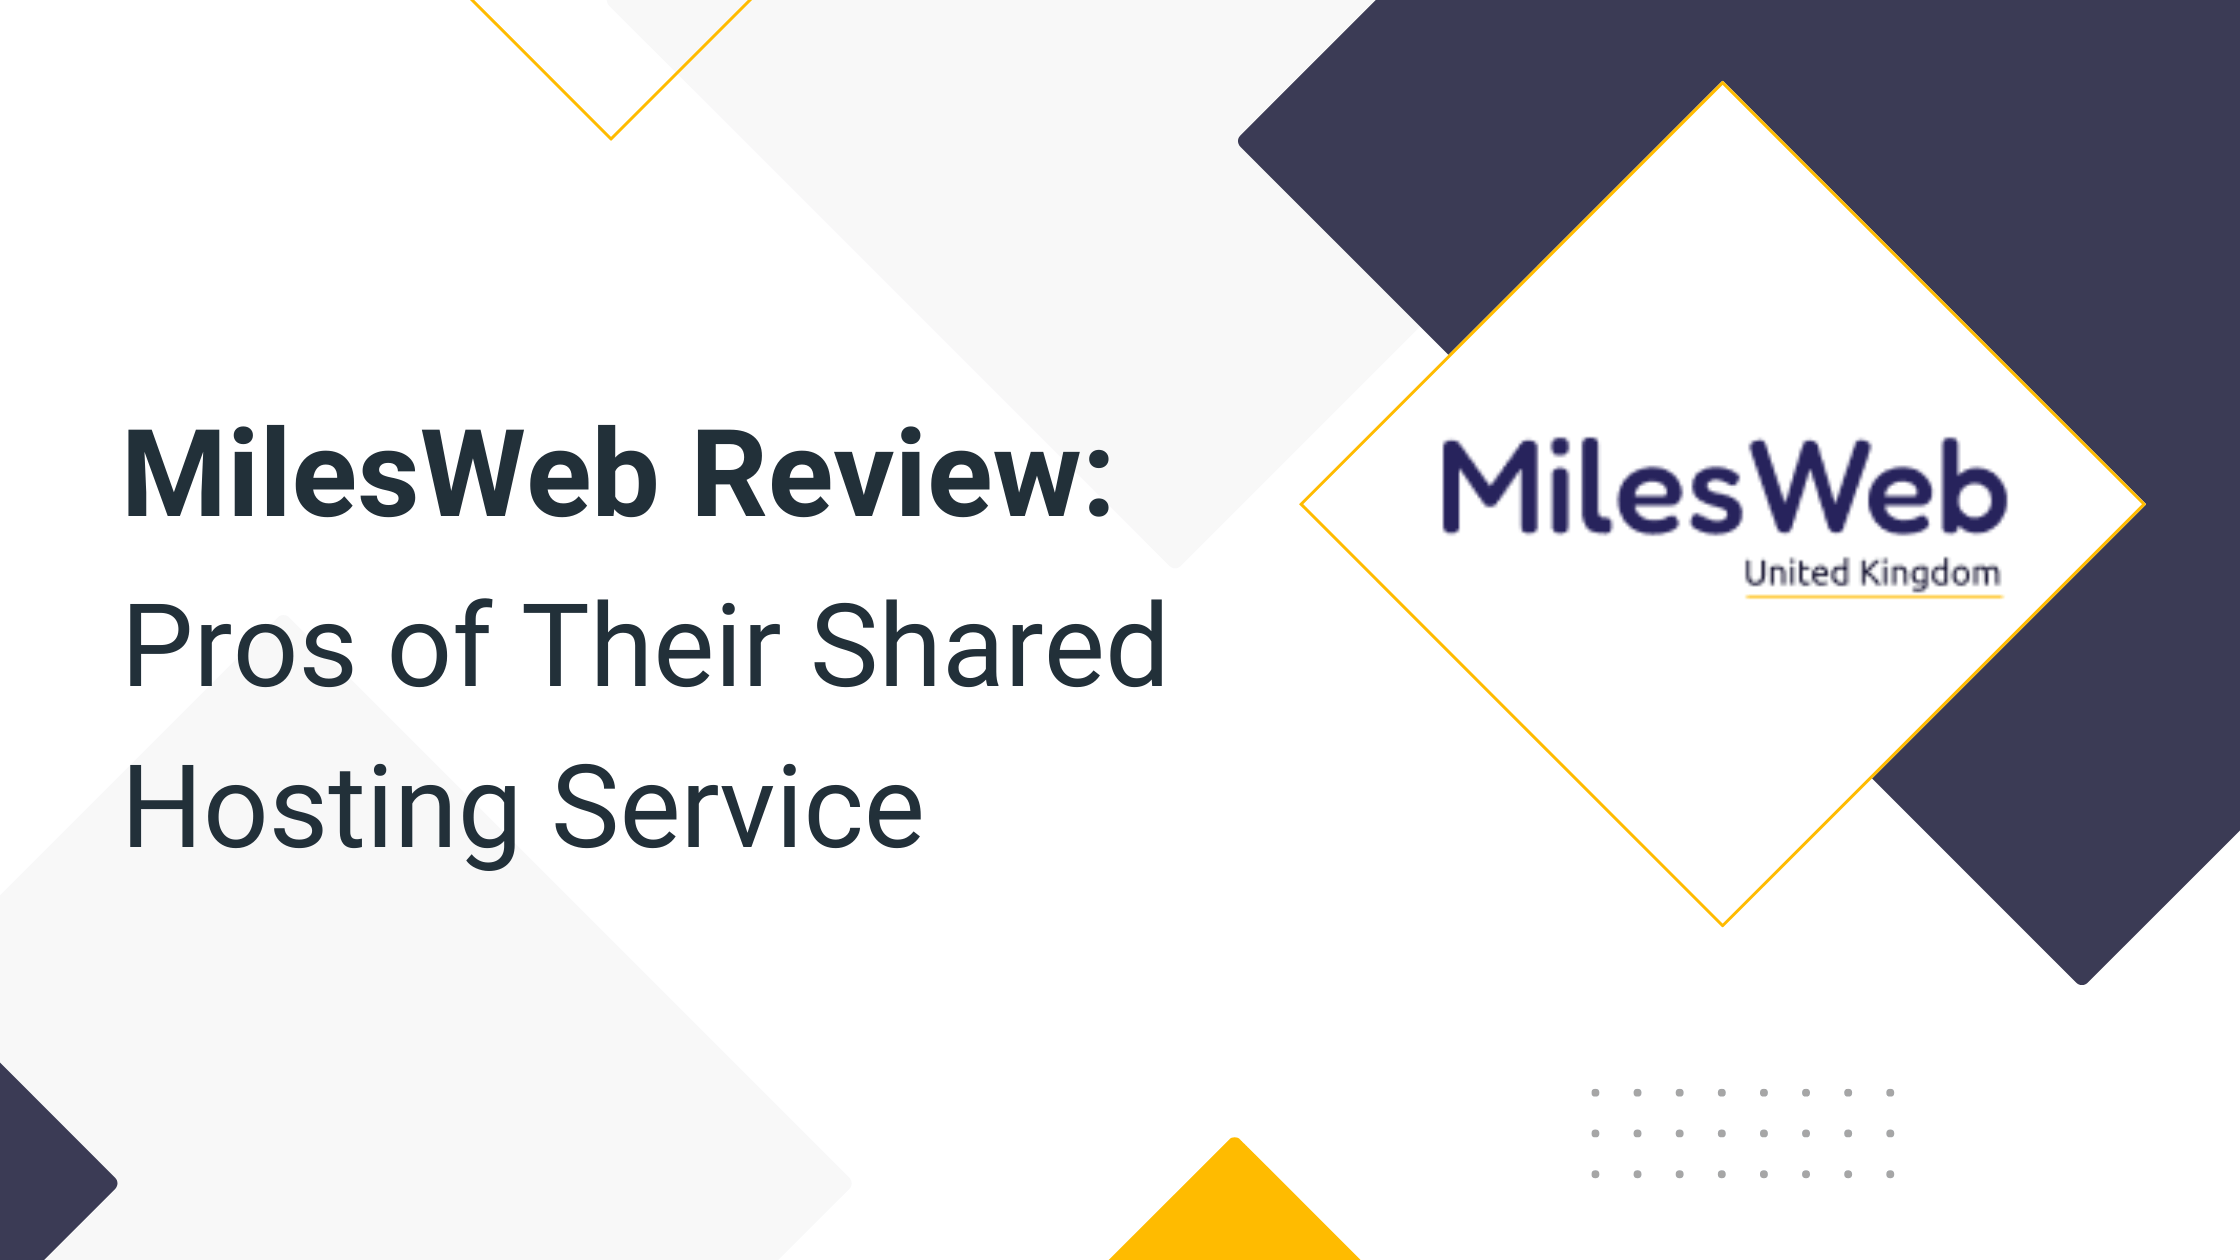 MilesWeb Review: Pros of Their Shared Hosting Service